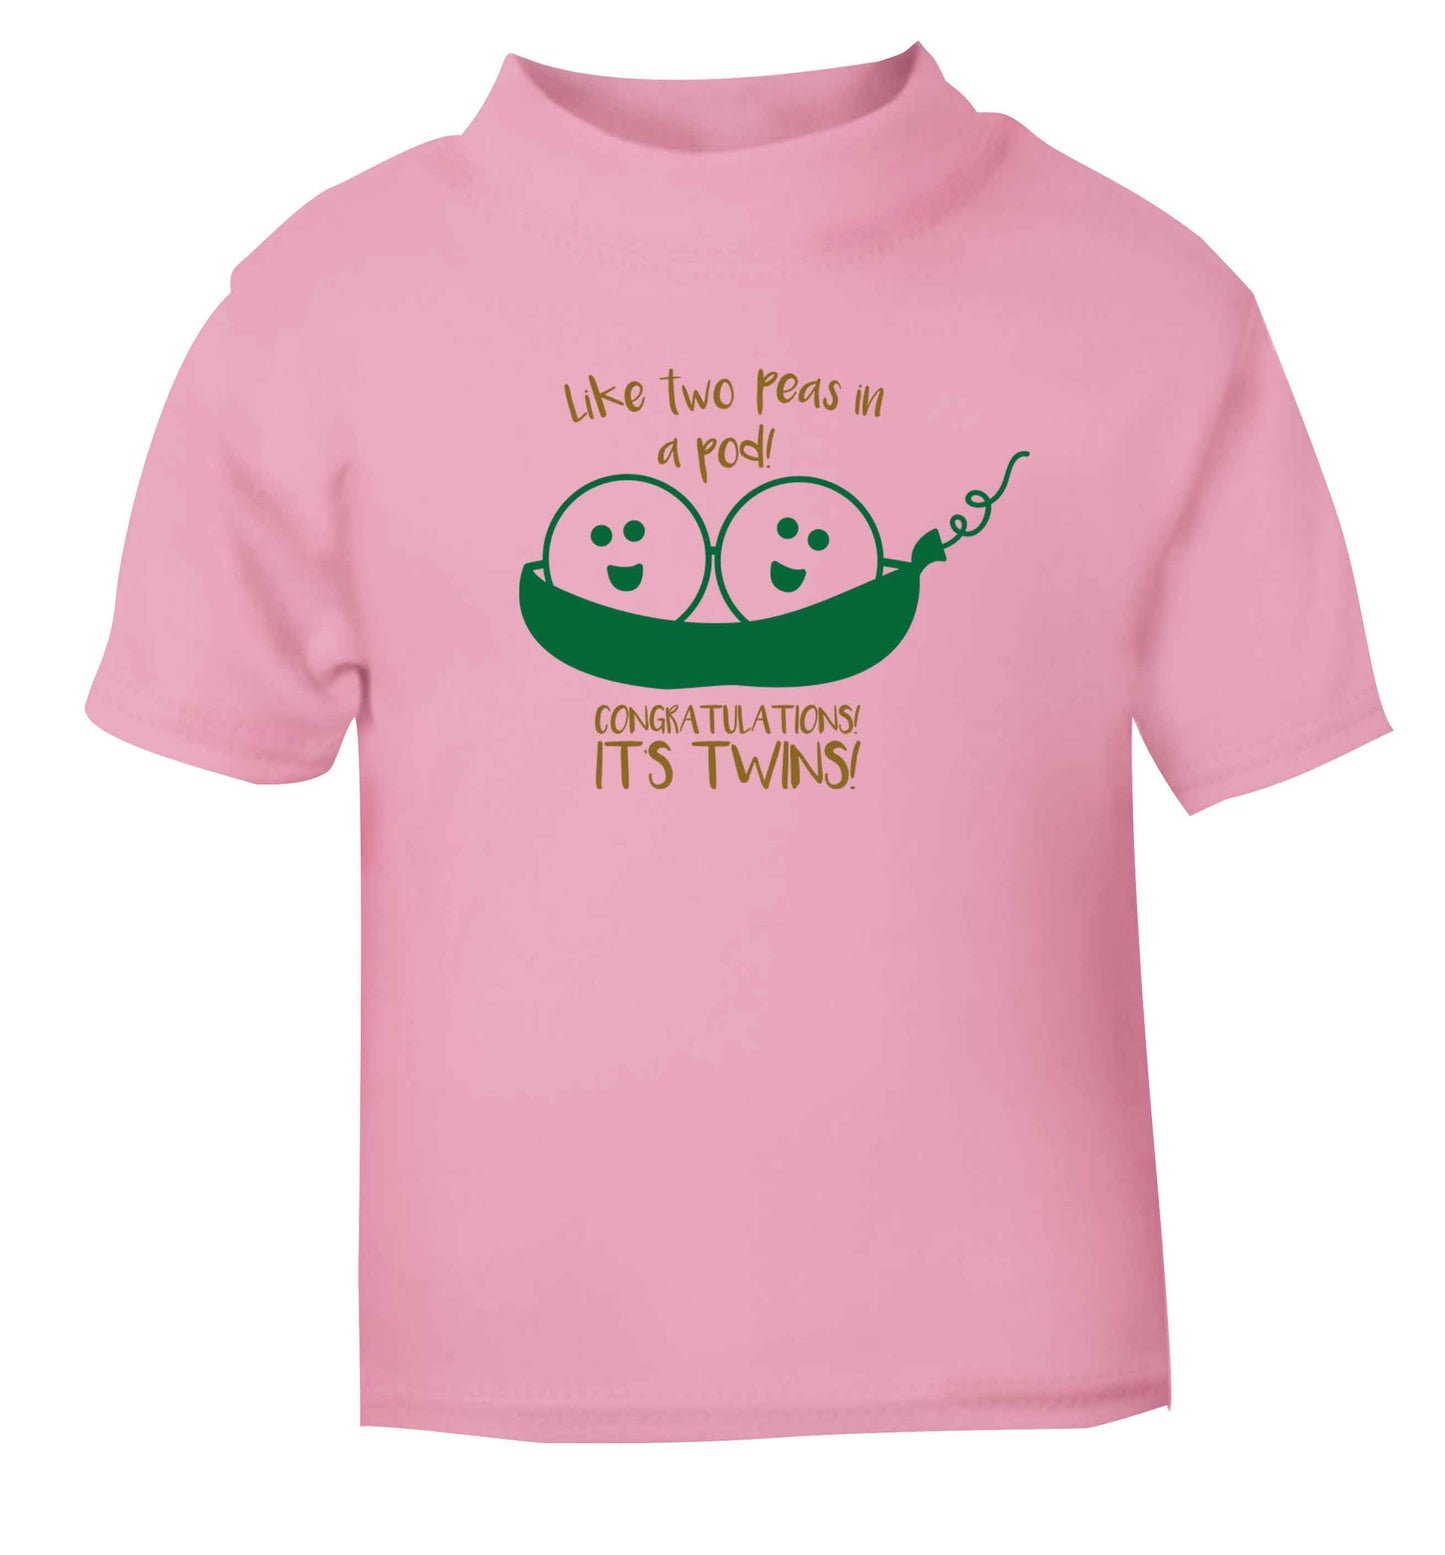 Like two peas in a pod! Congratulations it's twins! light pink baby toddler Tshirt 2 Years